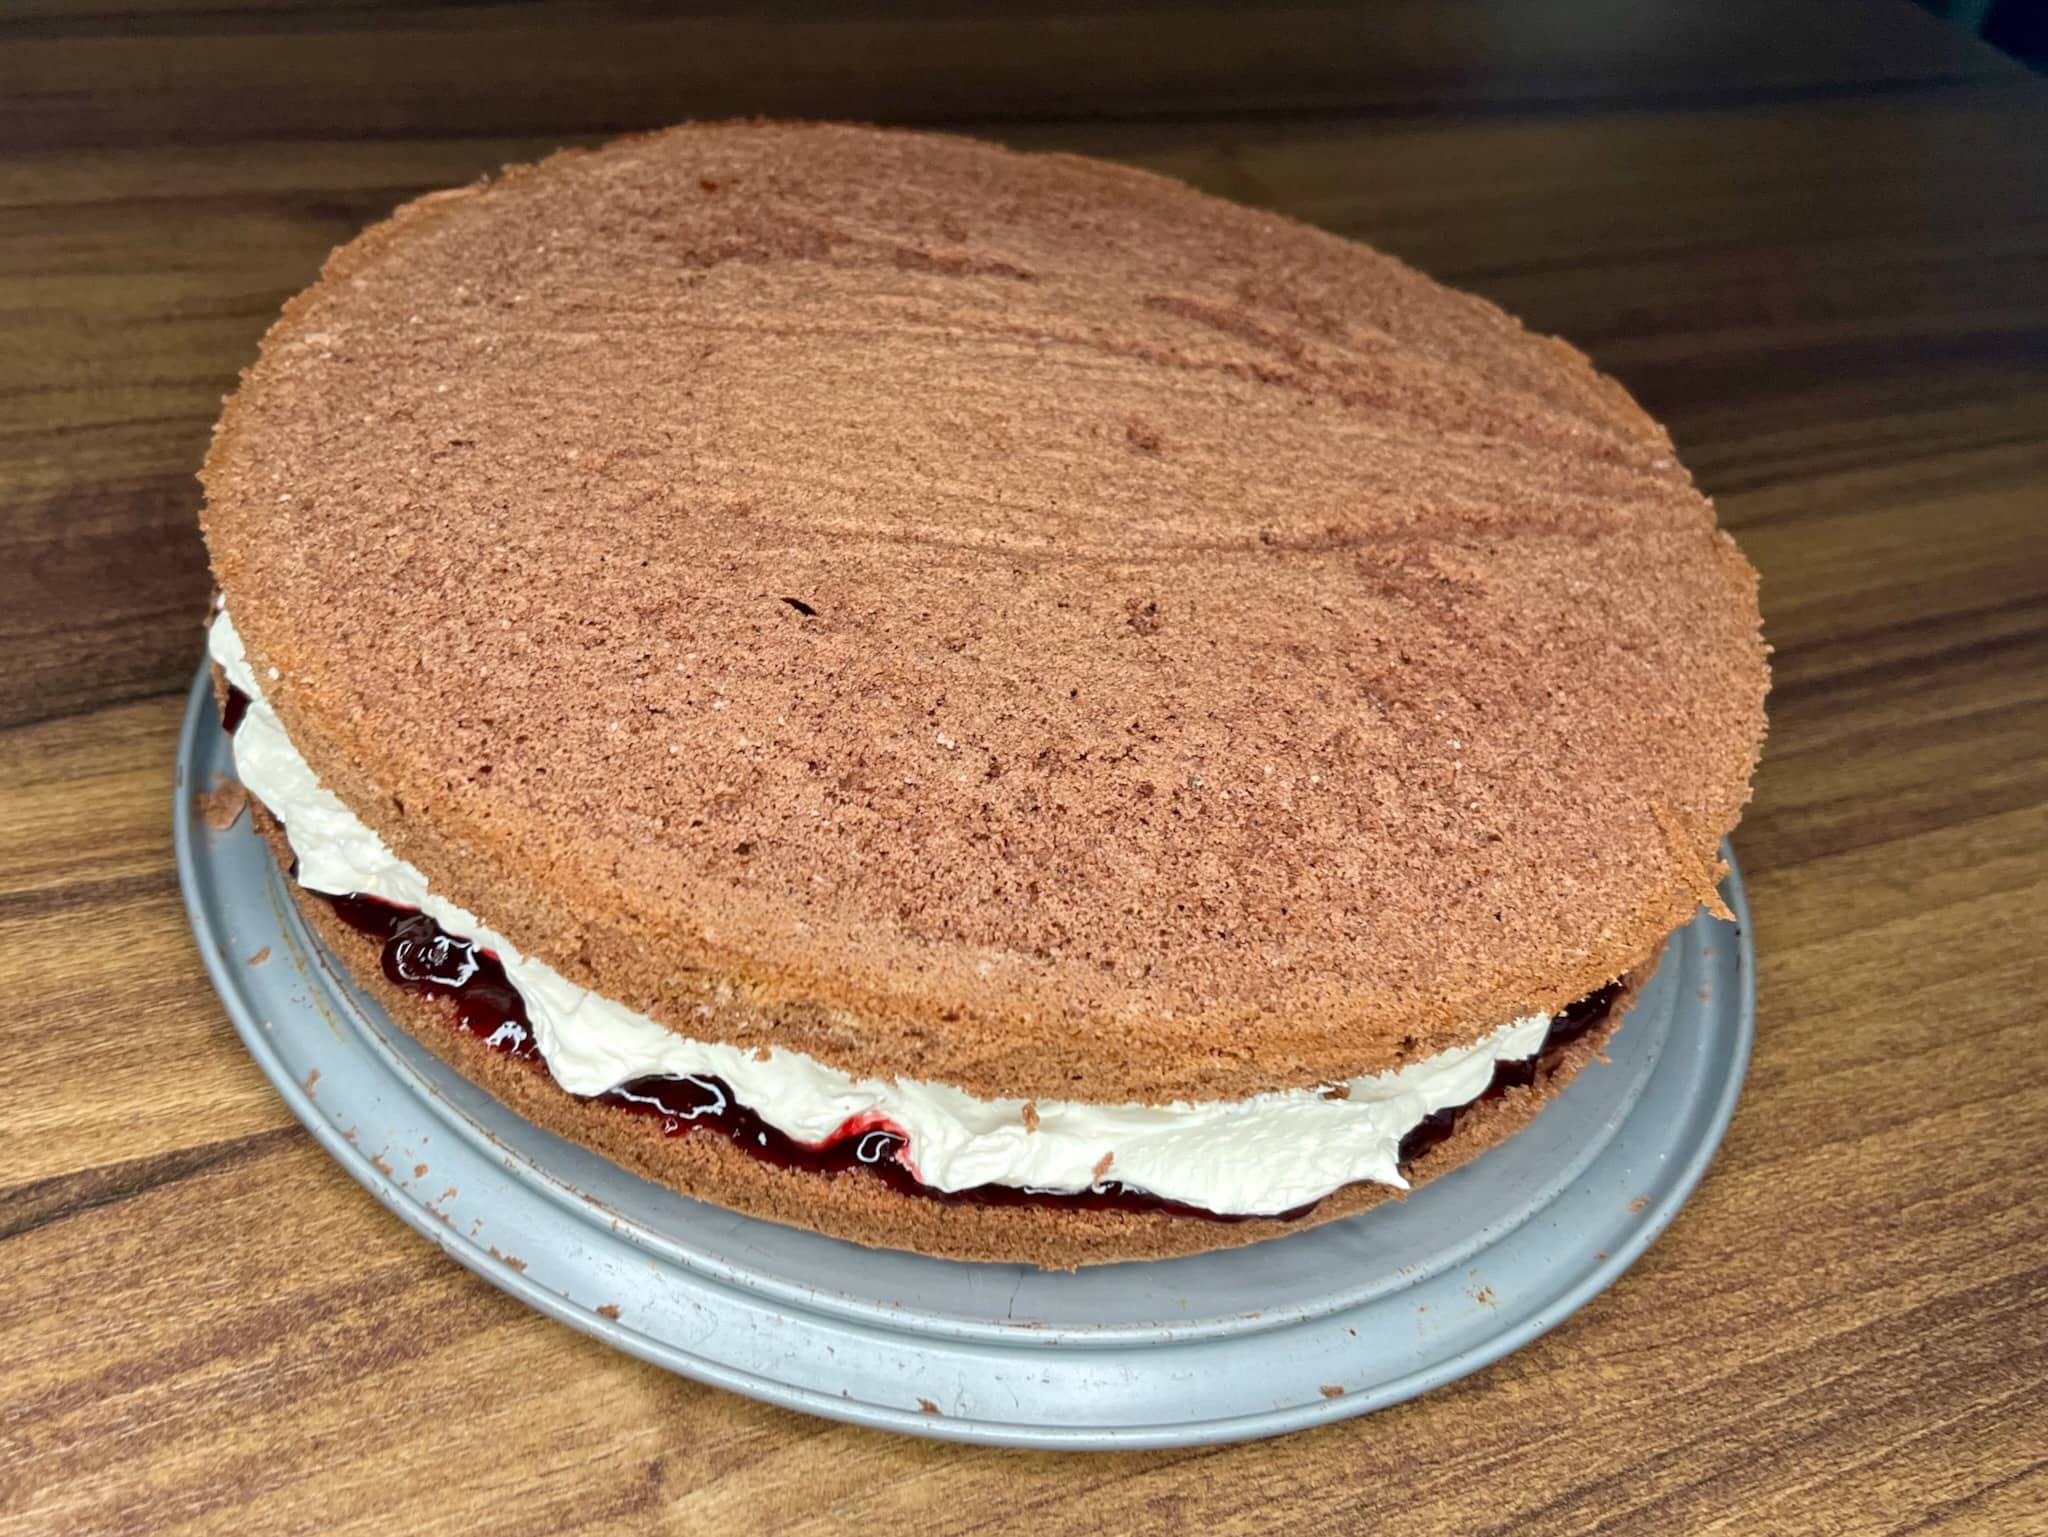 Another part of the cake is placed on top making cake sandwich